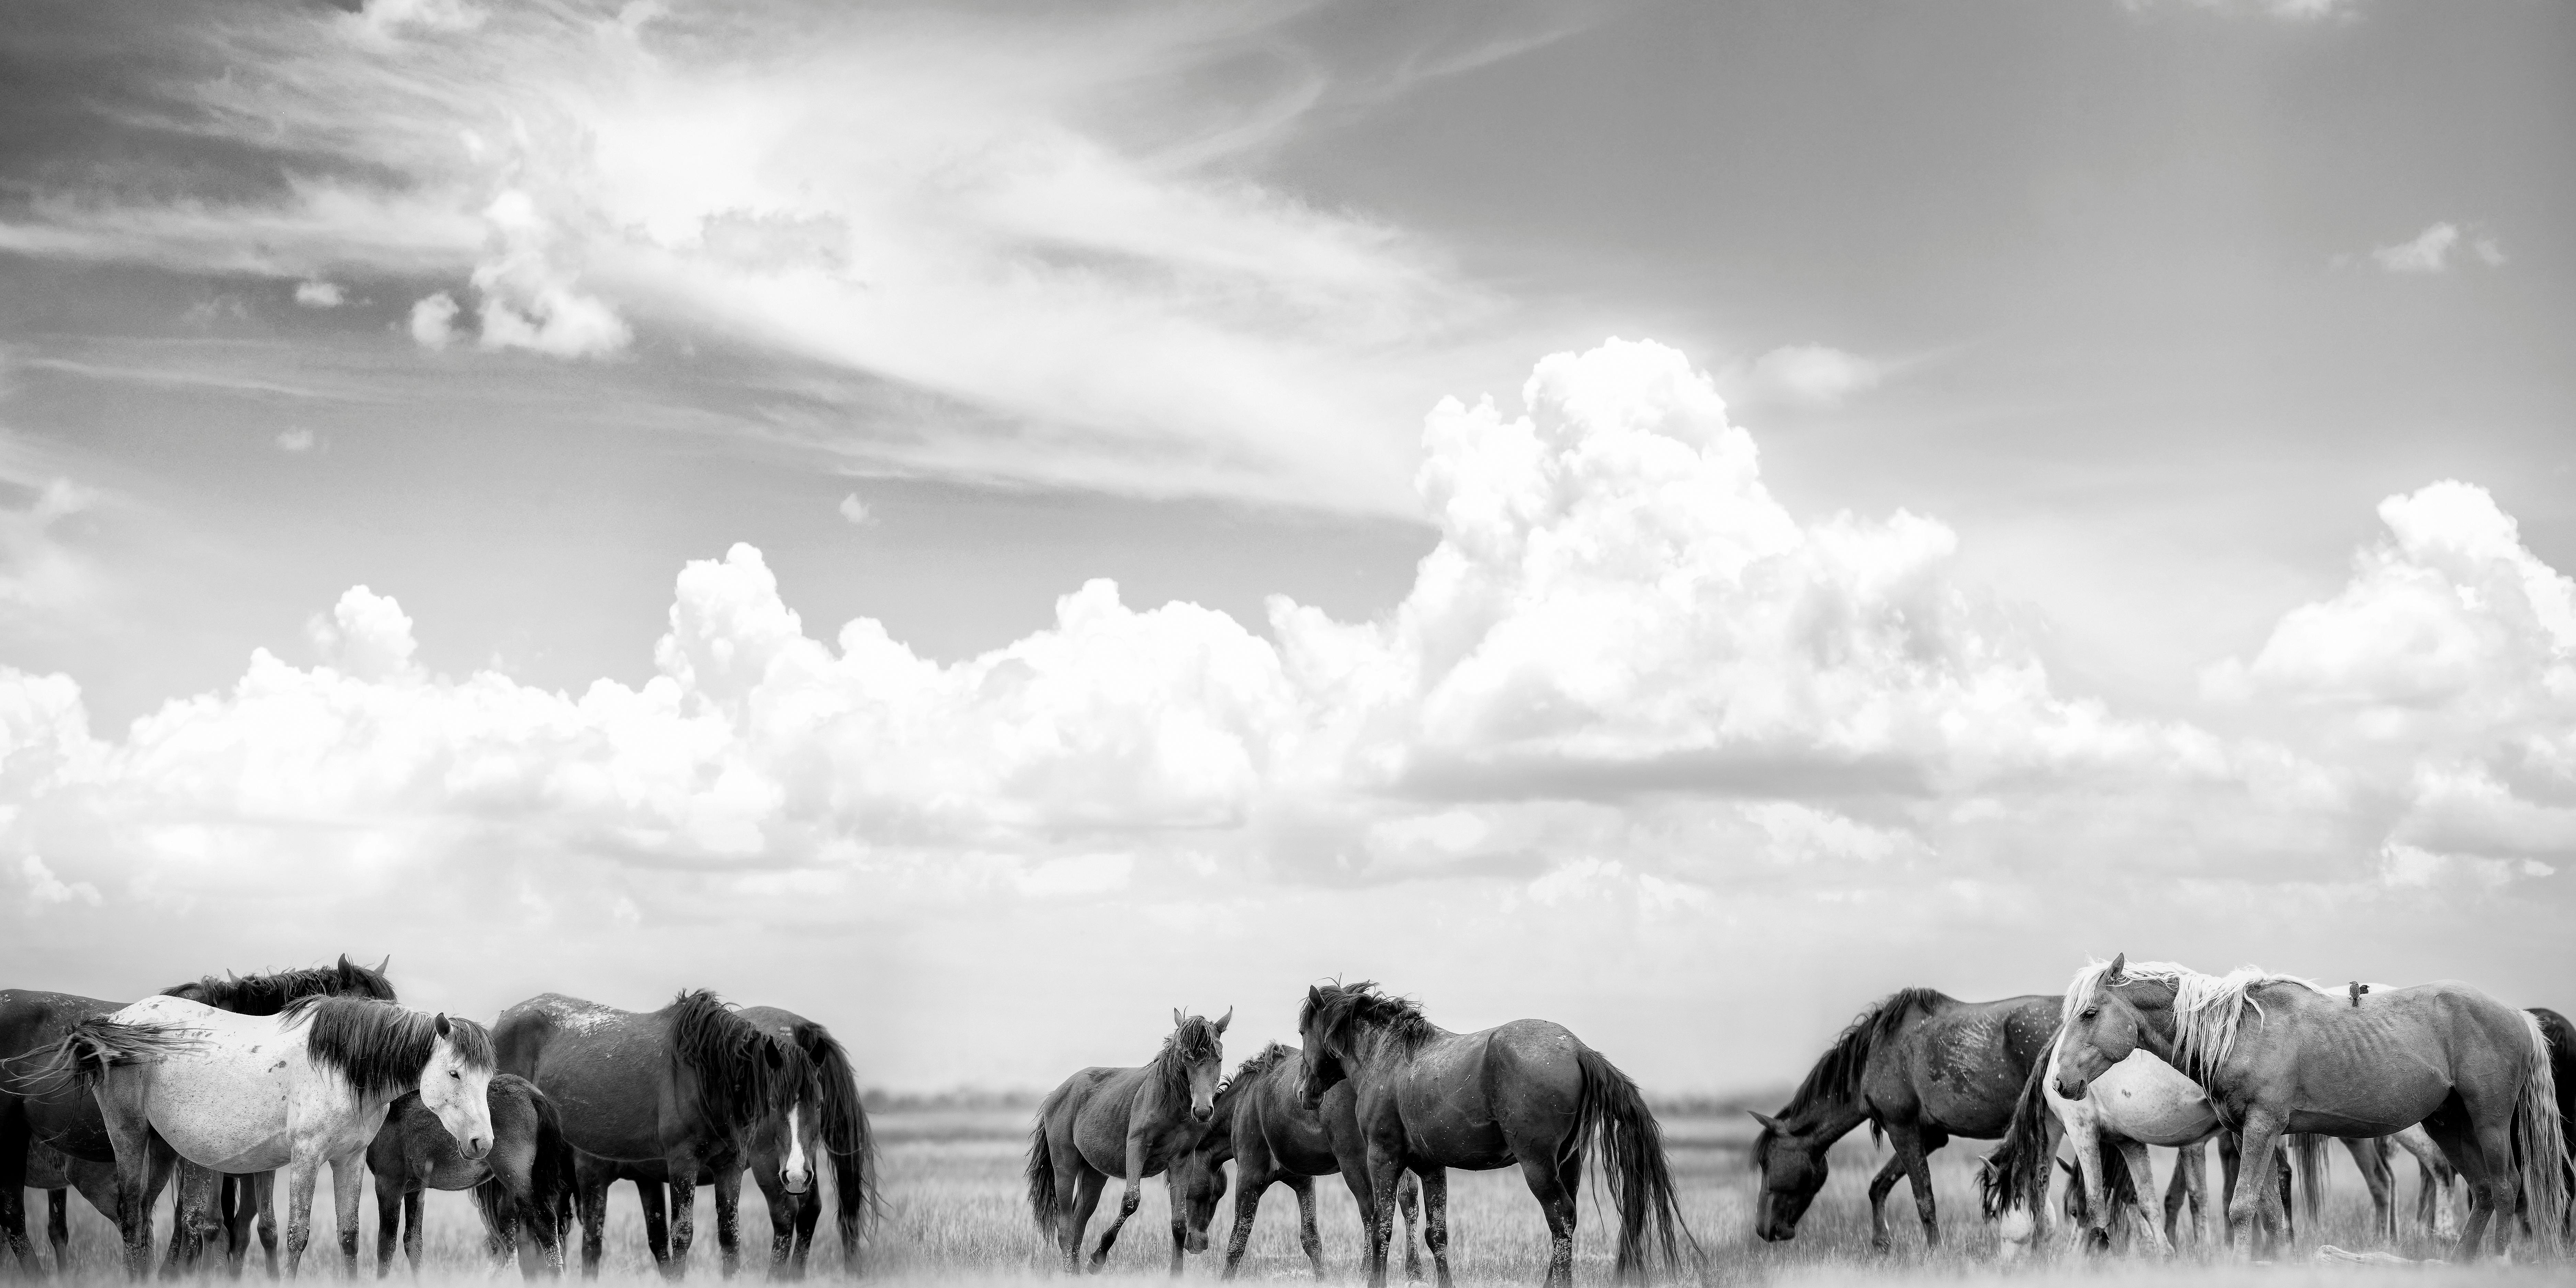 Animal Print Shane Russeck - « On Any Sunday » - 50x25 Photographie de chevaux sauvages, moutons, photographie d'art